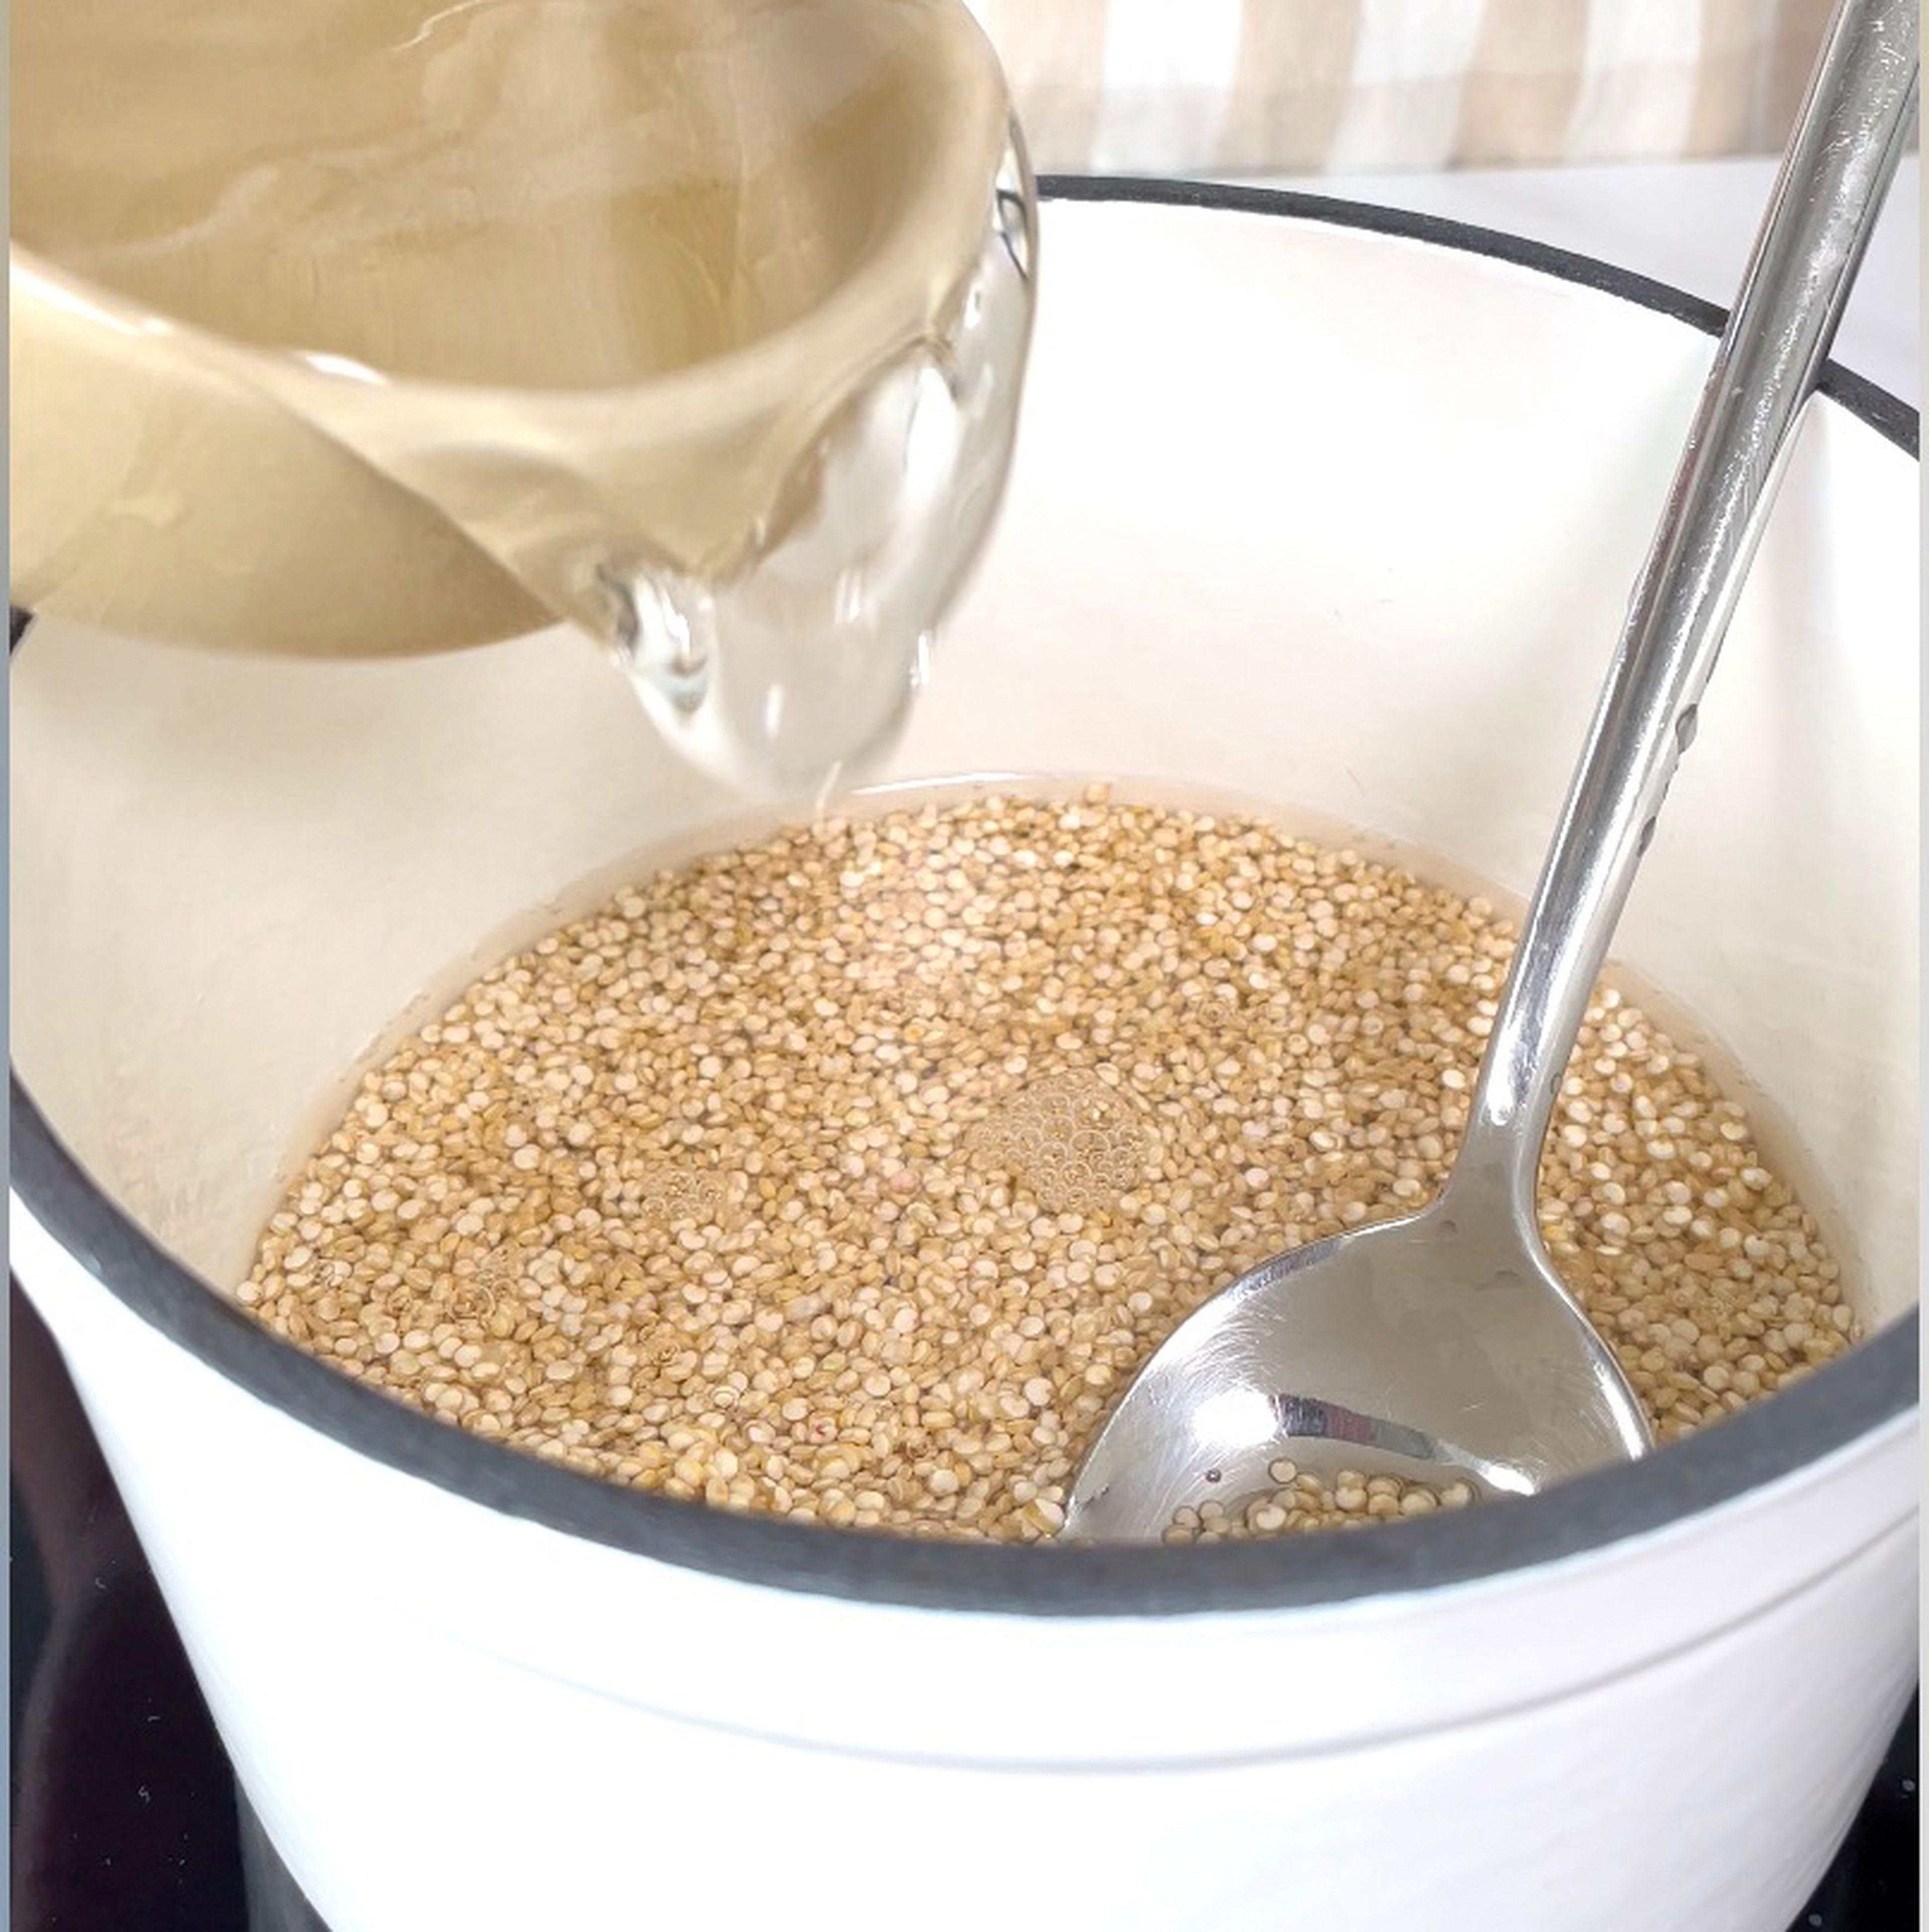 Rinse the quinoa under cold water in a sieve. In a small pot bring water to boil, add a pinch of salt and quinoa. Let simmer over medium heat for about 15 min.